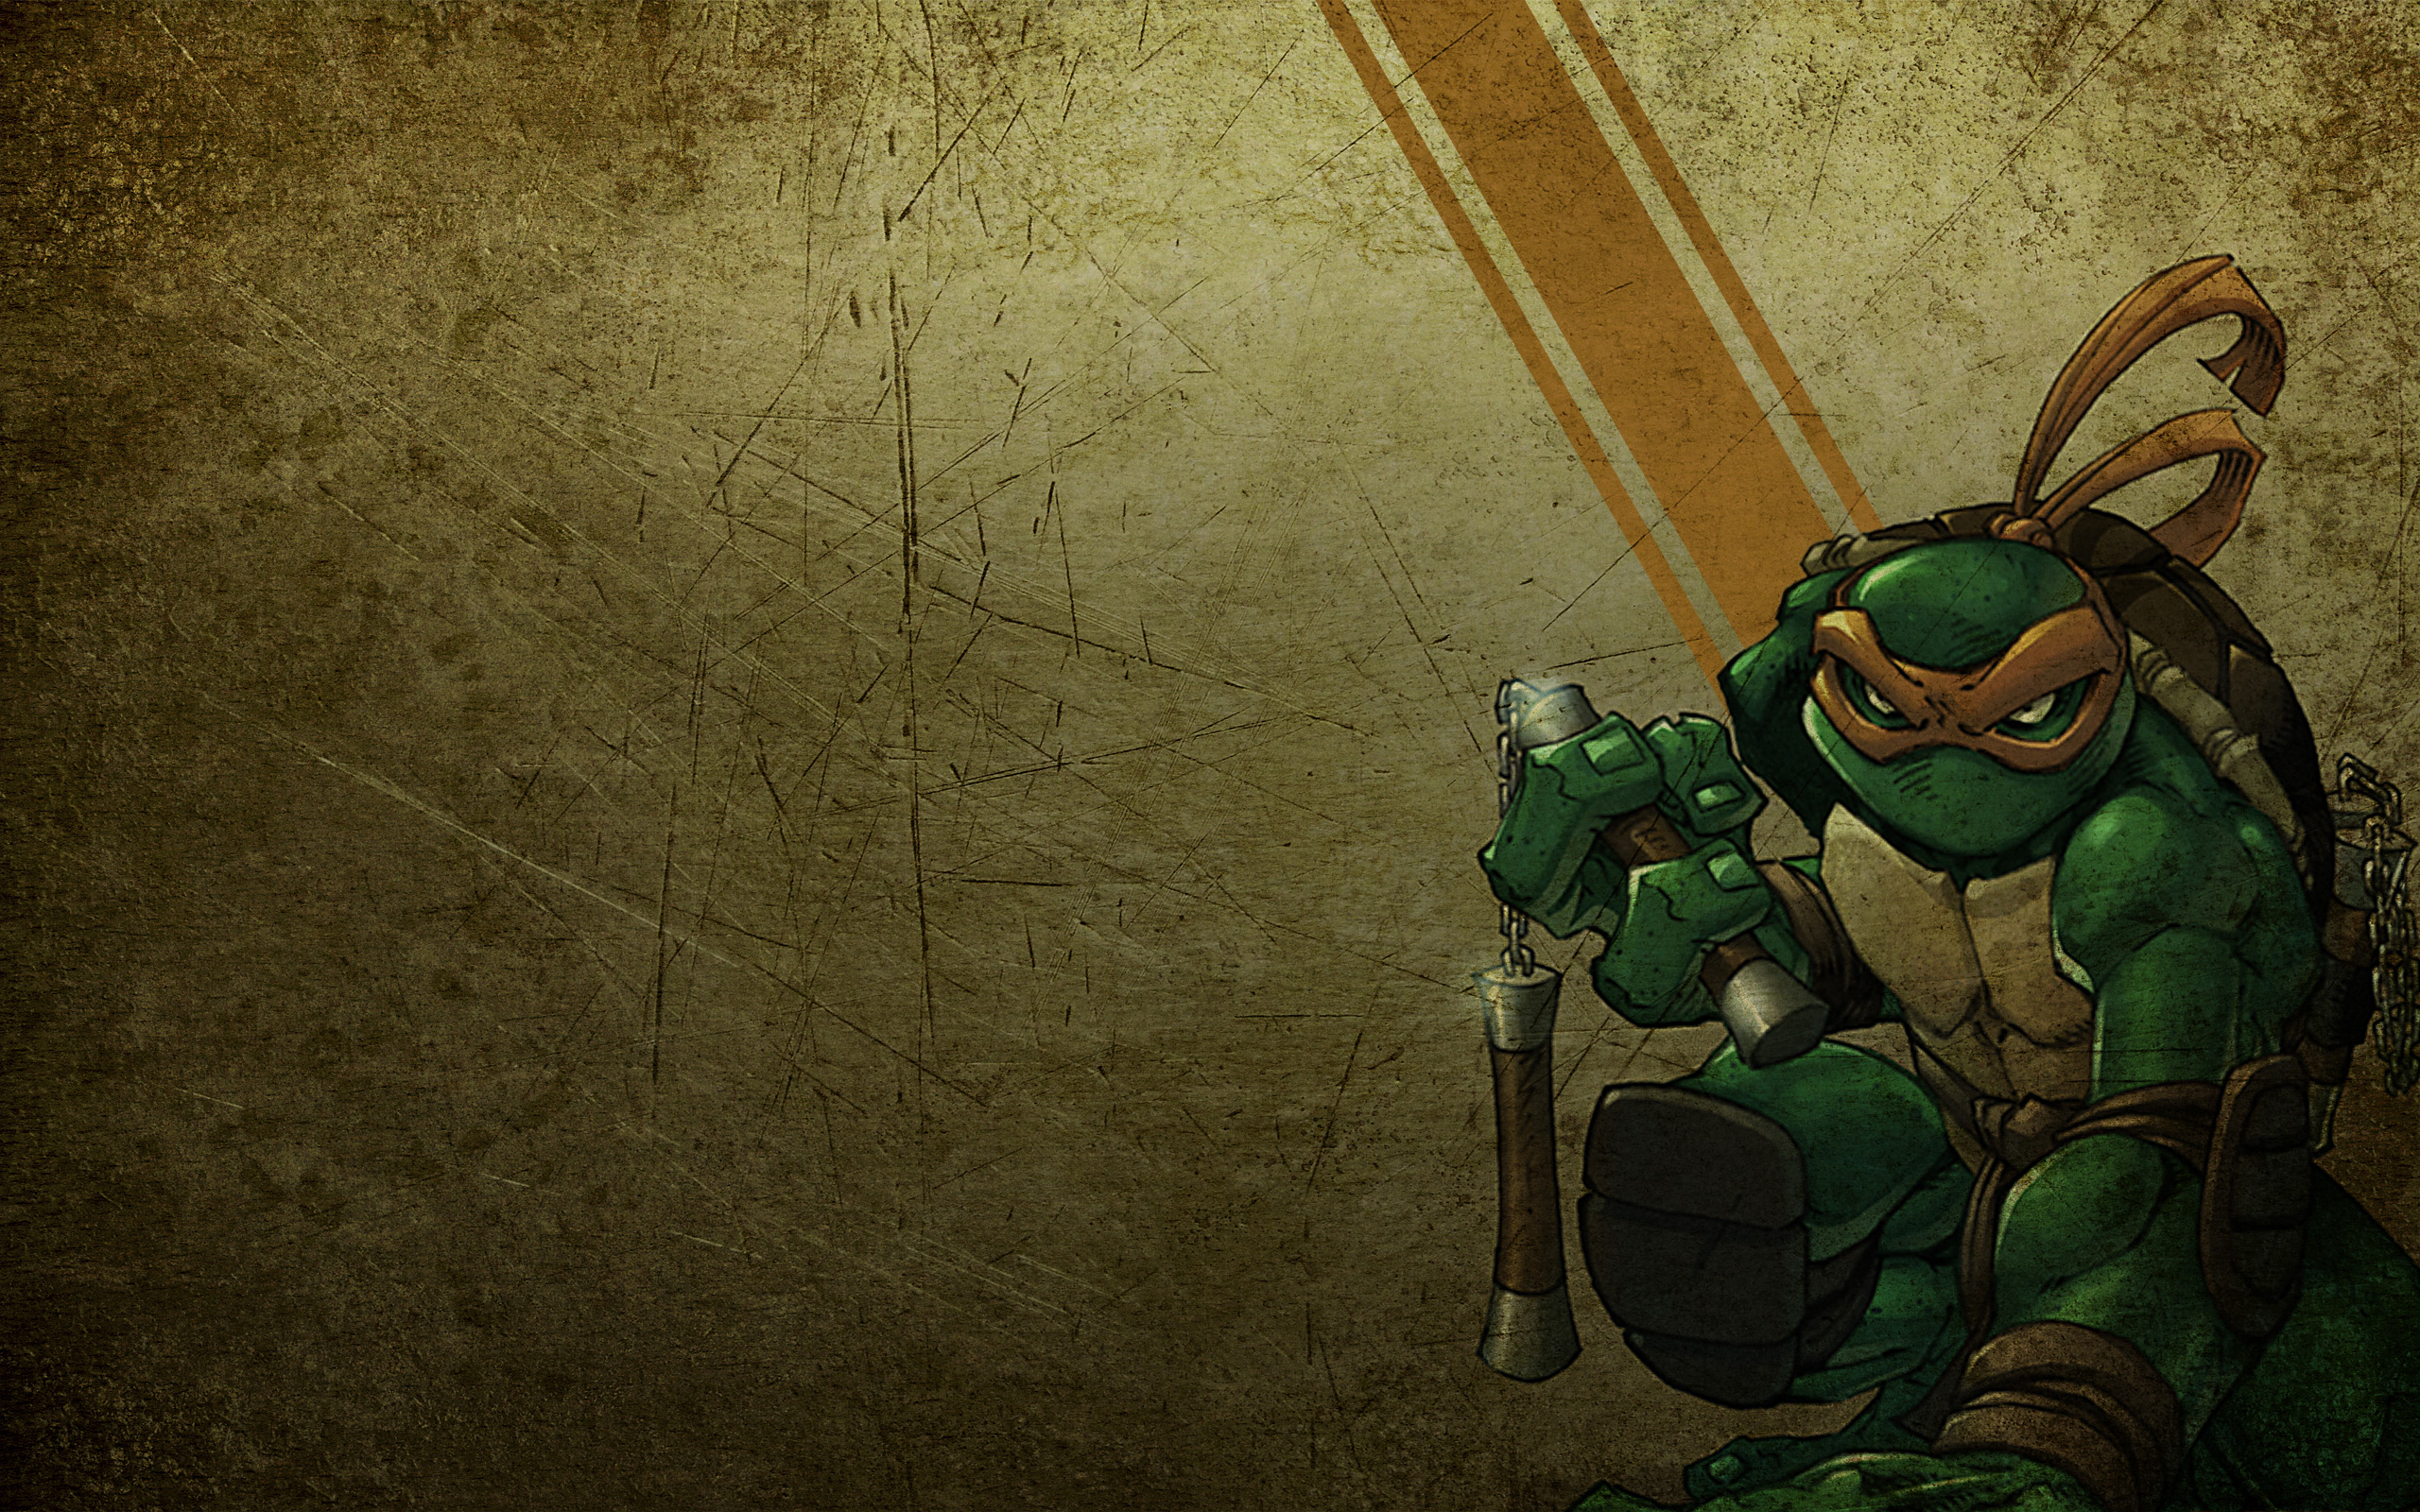 Michelangelo from TMNT, ready for action!